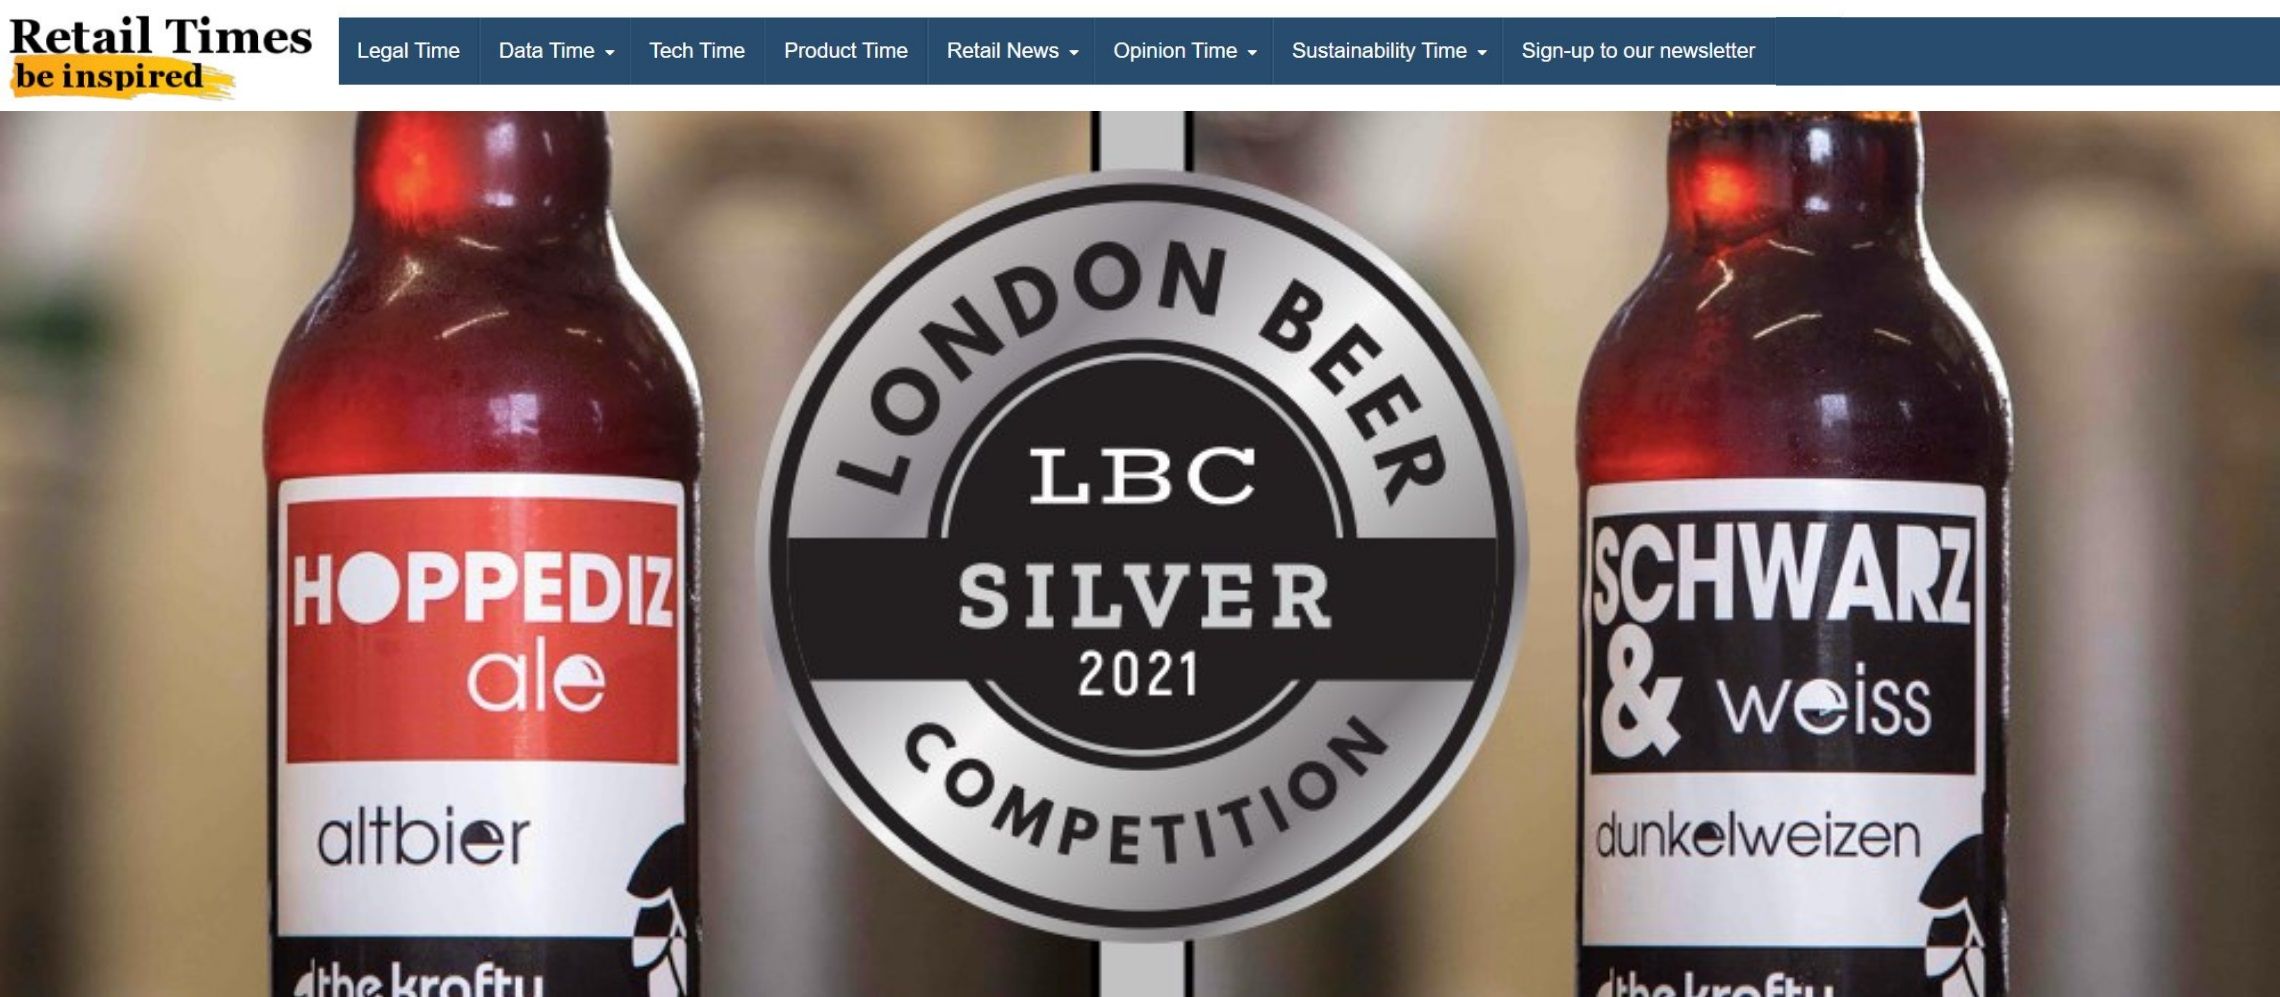 Photo for: Silver Medals for Krafty Braumeister at the 4th Annual London Beer Competition 2021